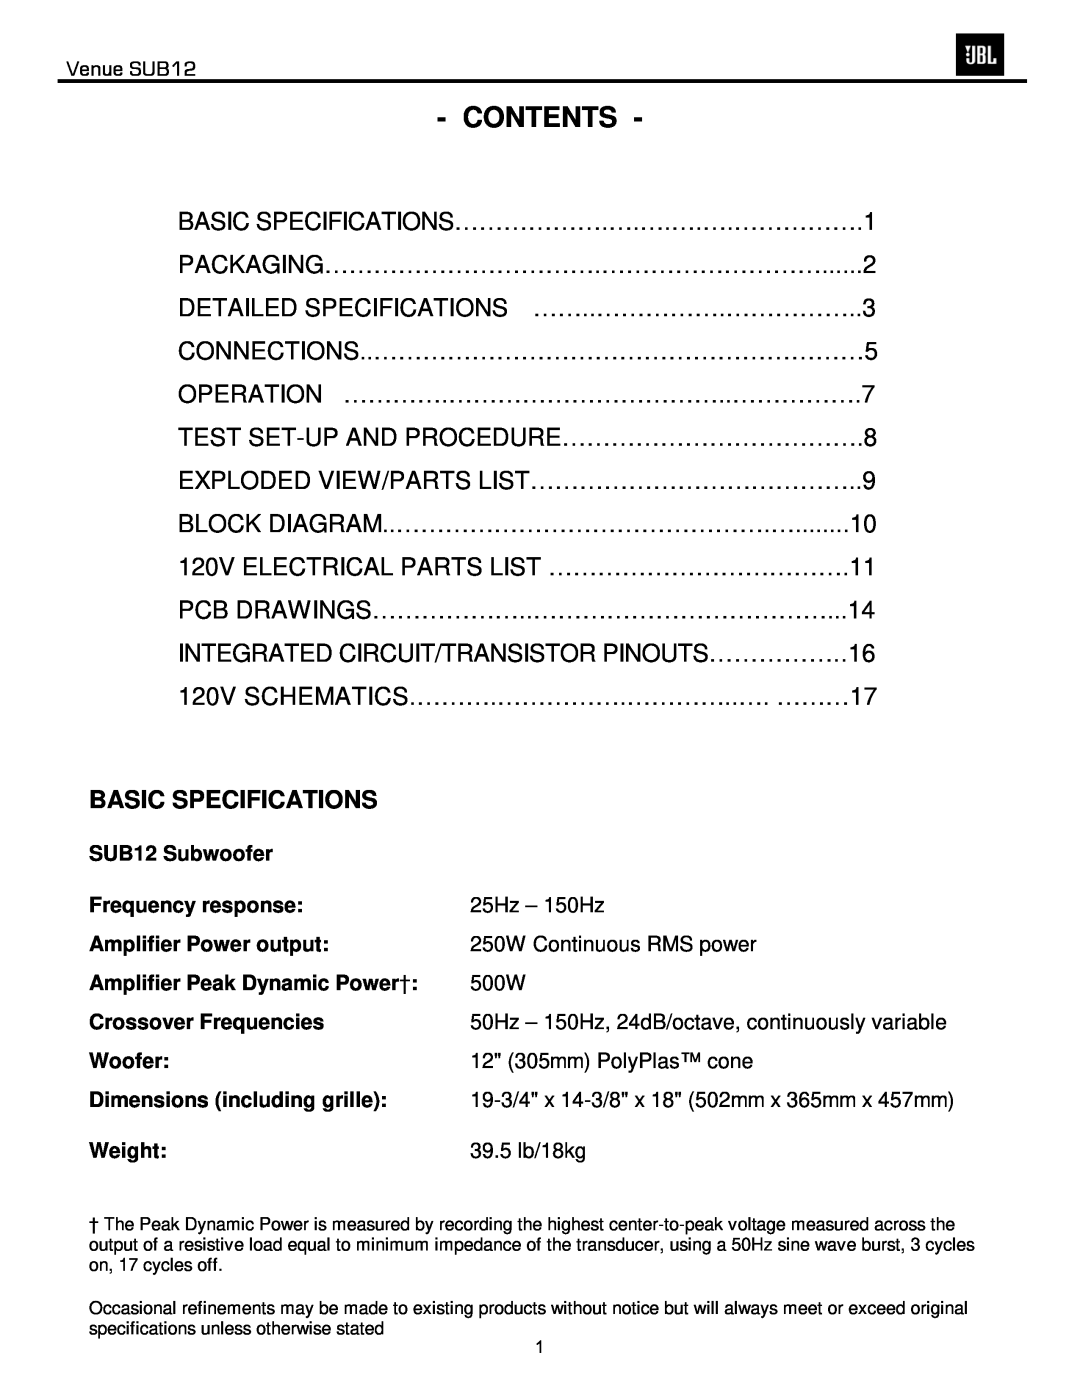 JBL SUB12 service manual Basic Specifications, Contents 